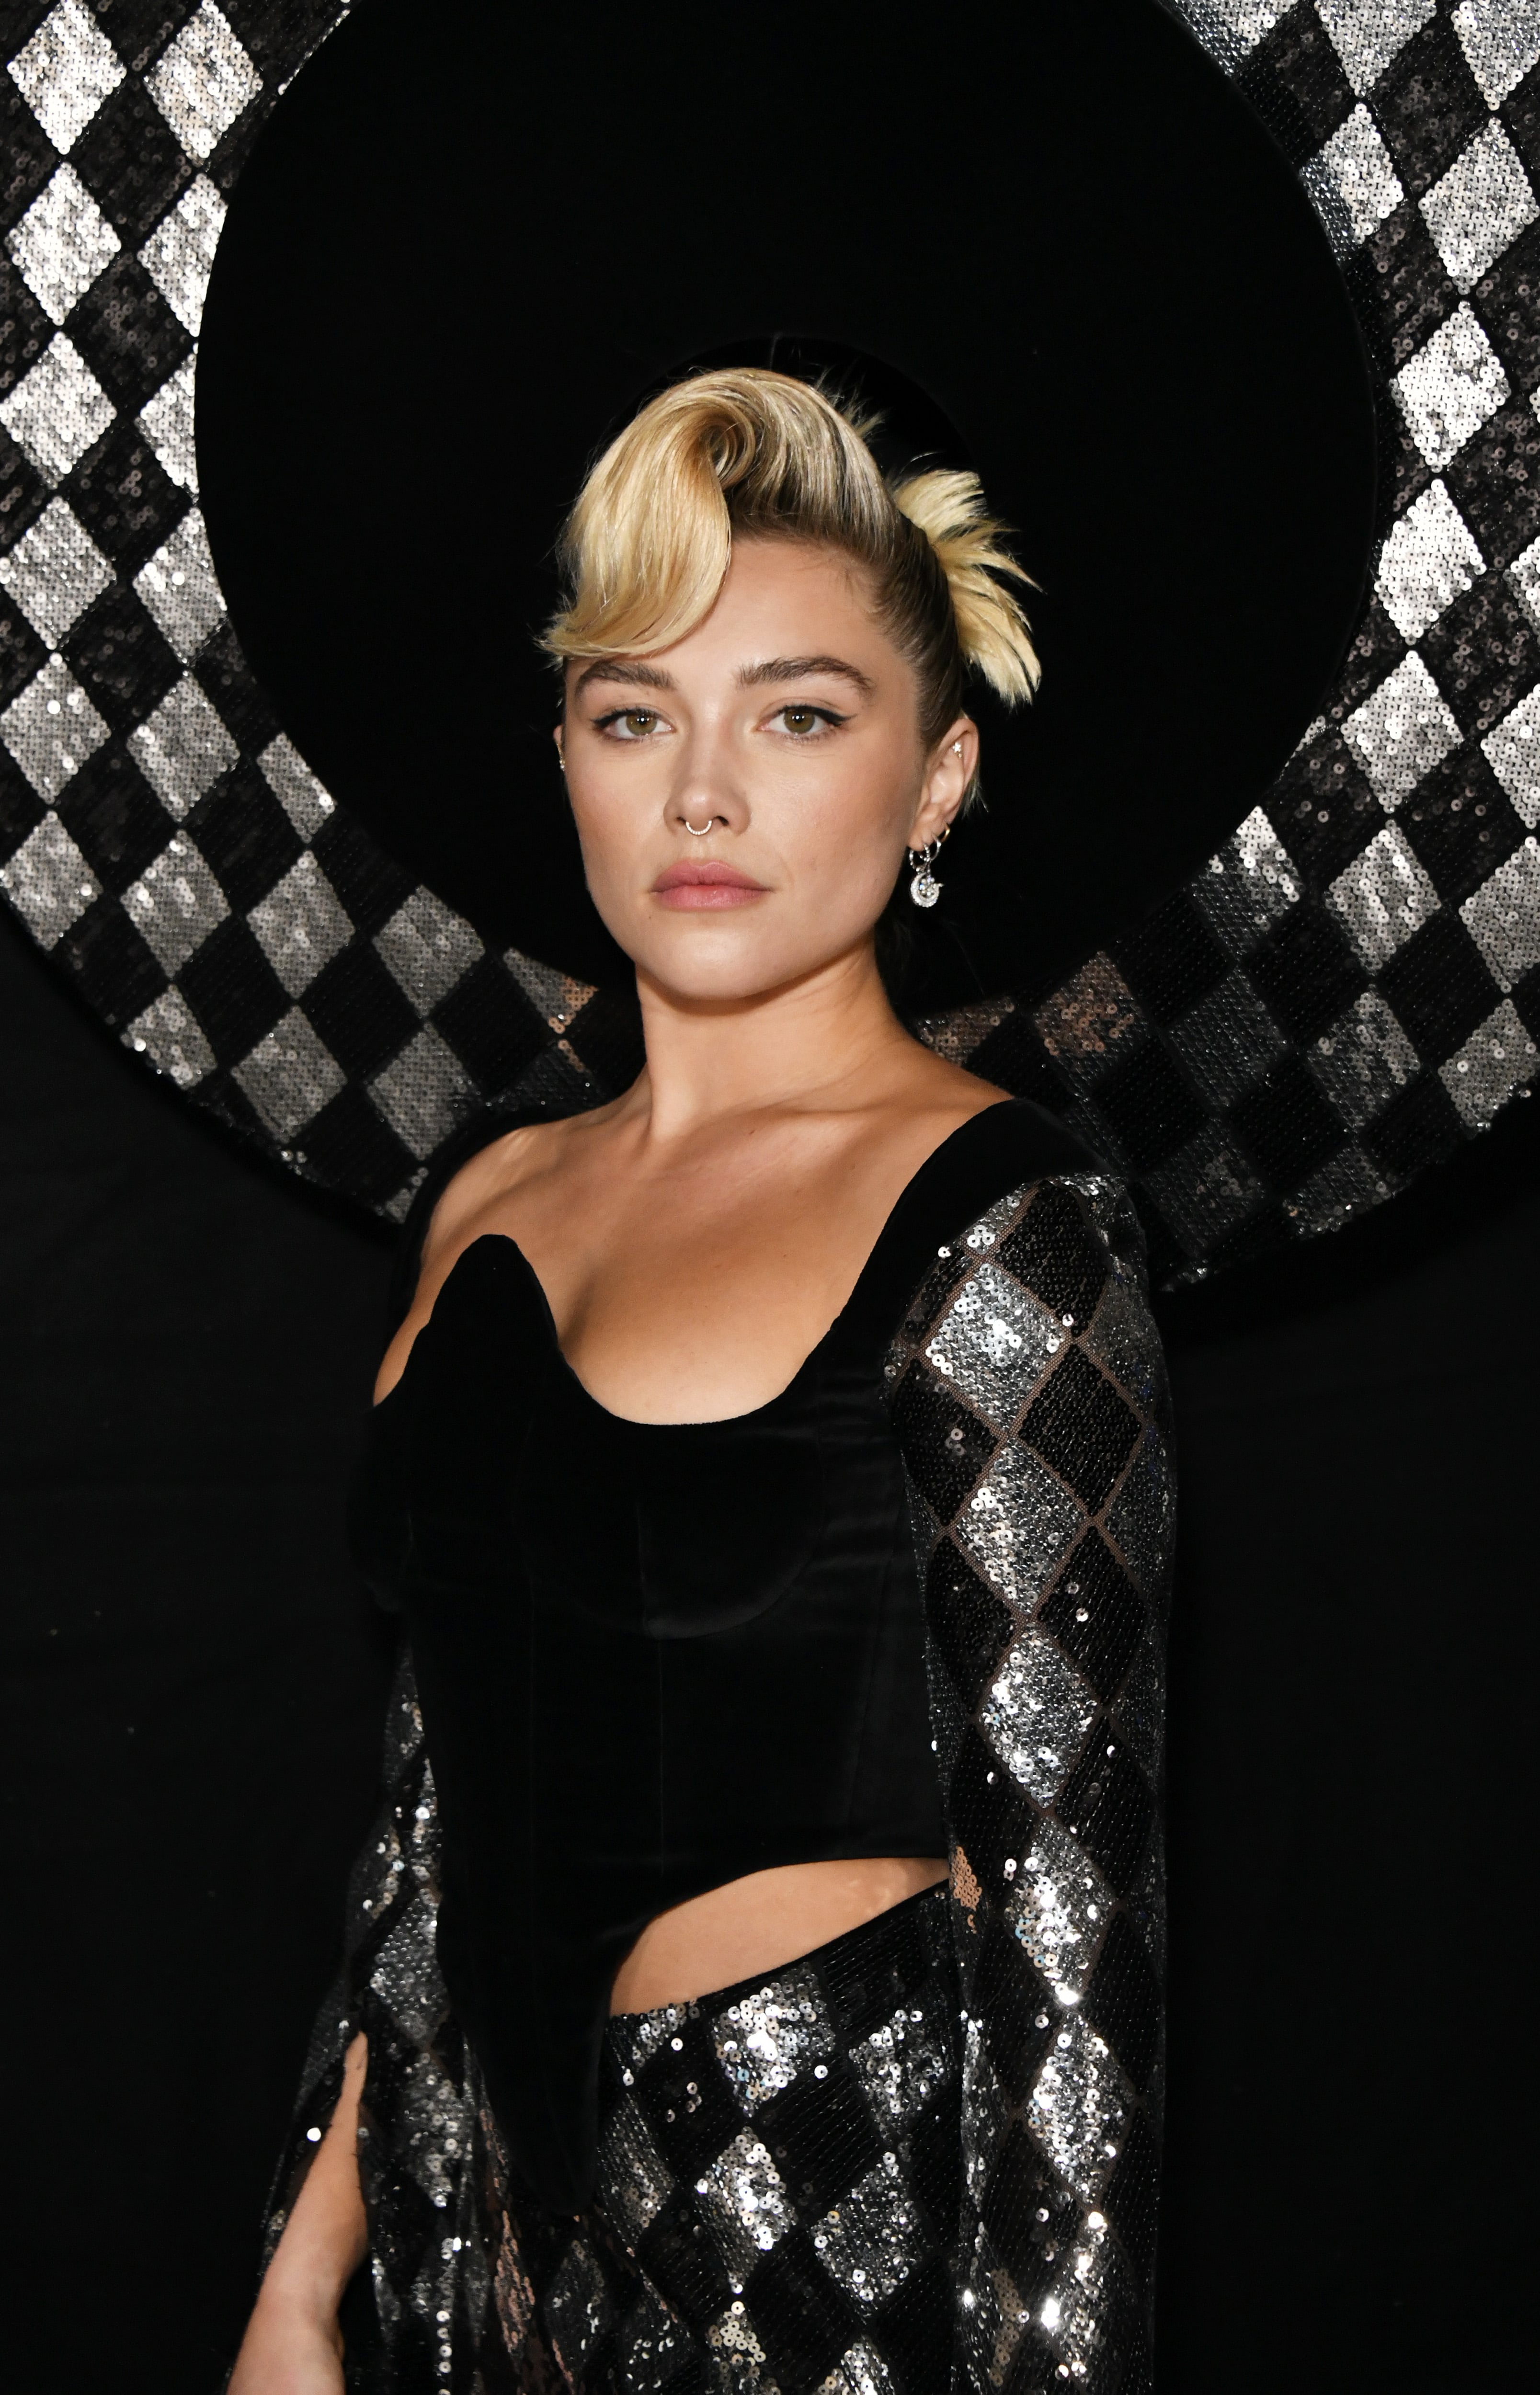 The 23-year-old model is known for her bold fashion choices and is a close friend of the fashion house. - Florence Pugh